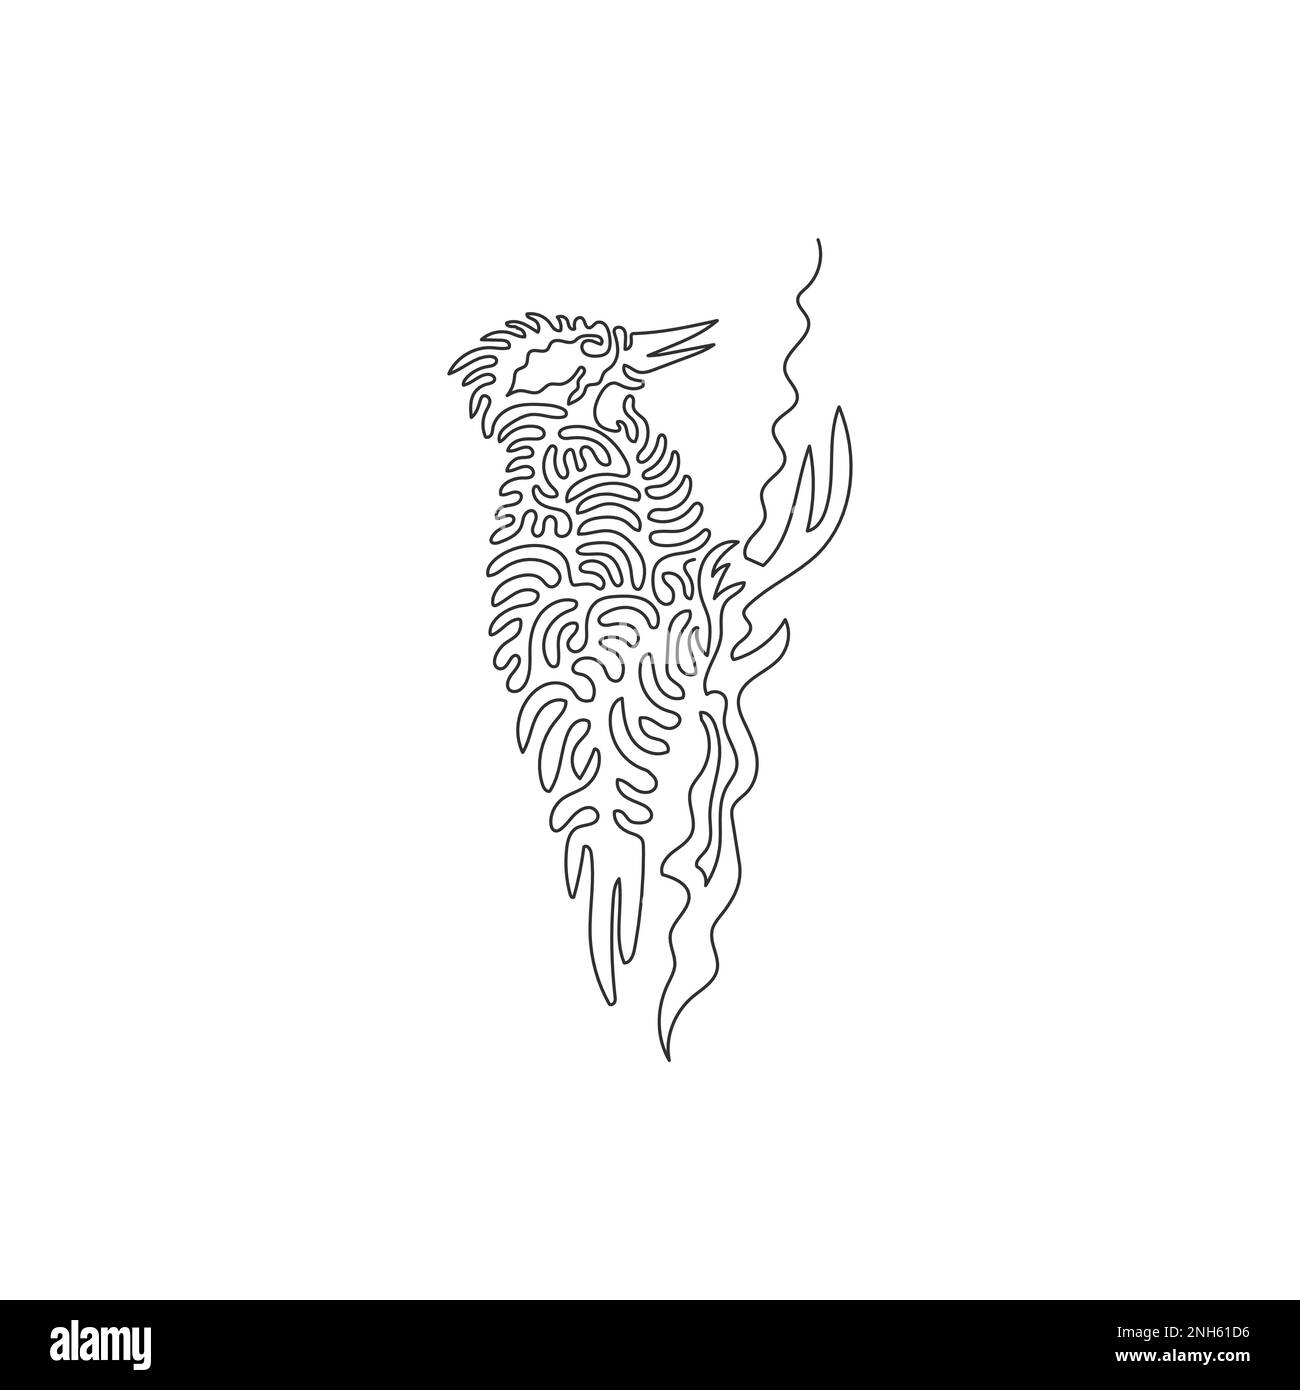 Continuous one line drawing of agile tiny woodpecker abstract art. Single line editable stroke vector illustration of an adorable woodpecker Stock Vector